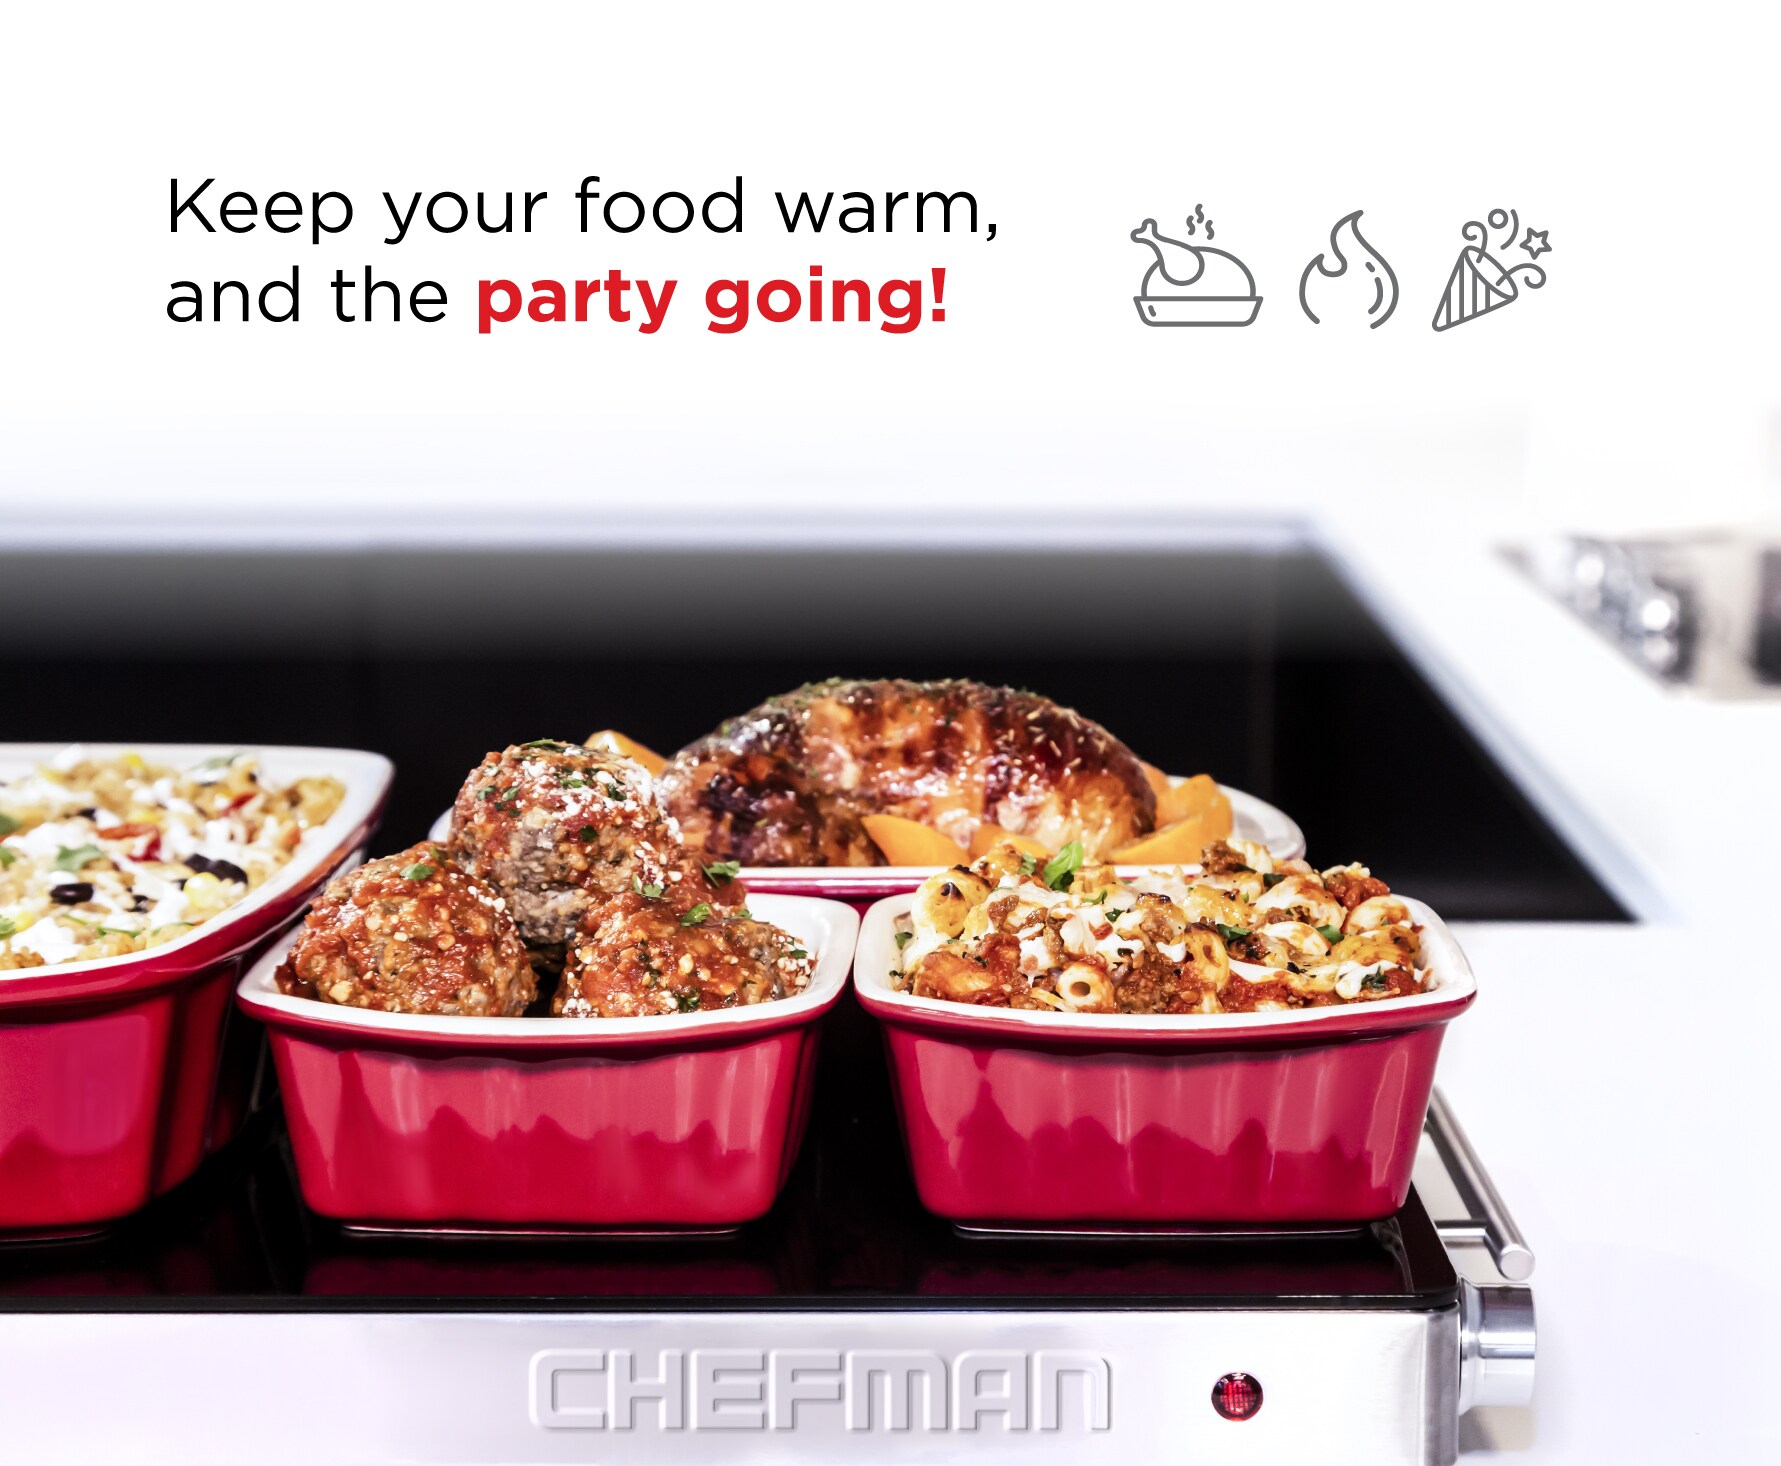 10 Ways To Keep Food Warm At Your Next Party  Keep food warm, Food warmer  buffet, Party food warmers